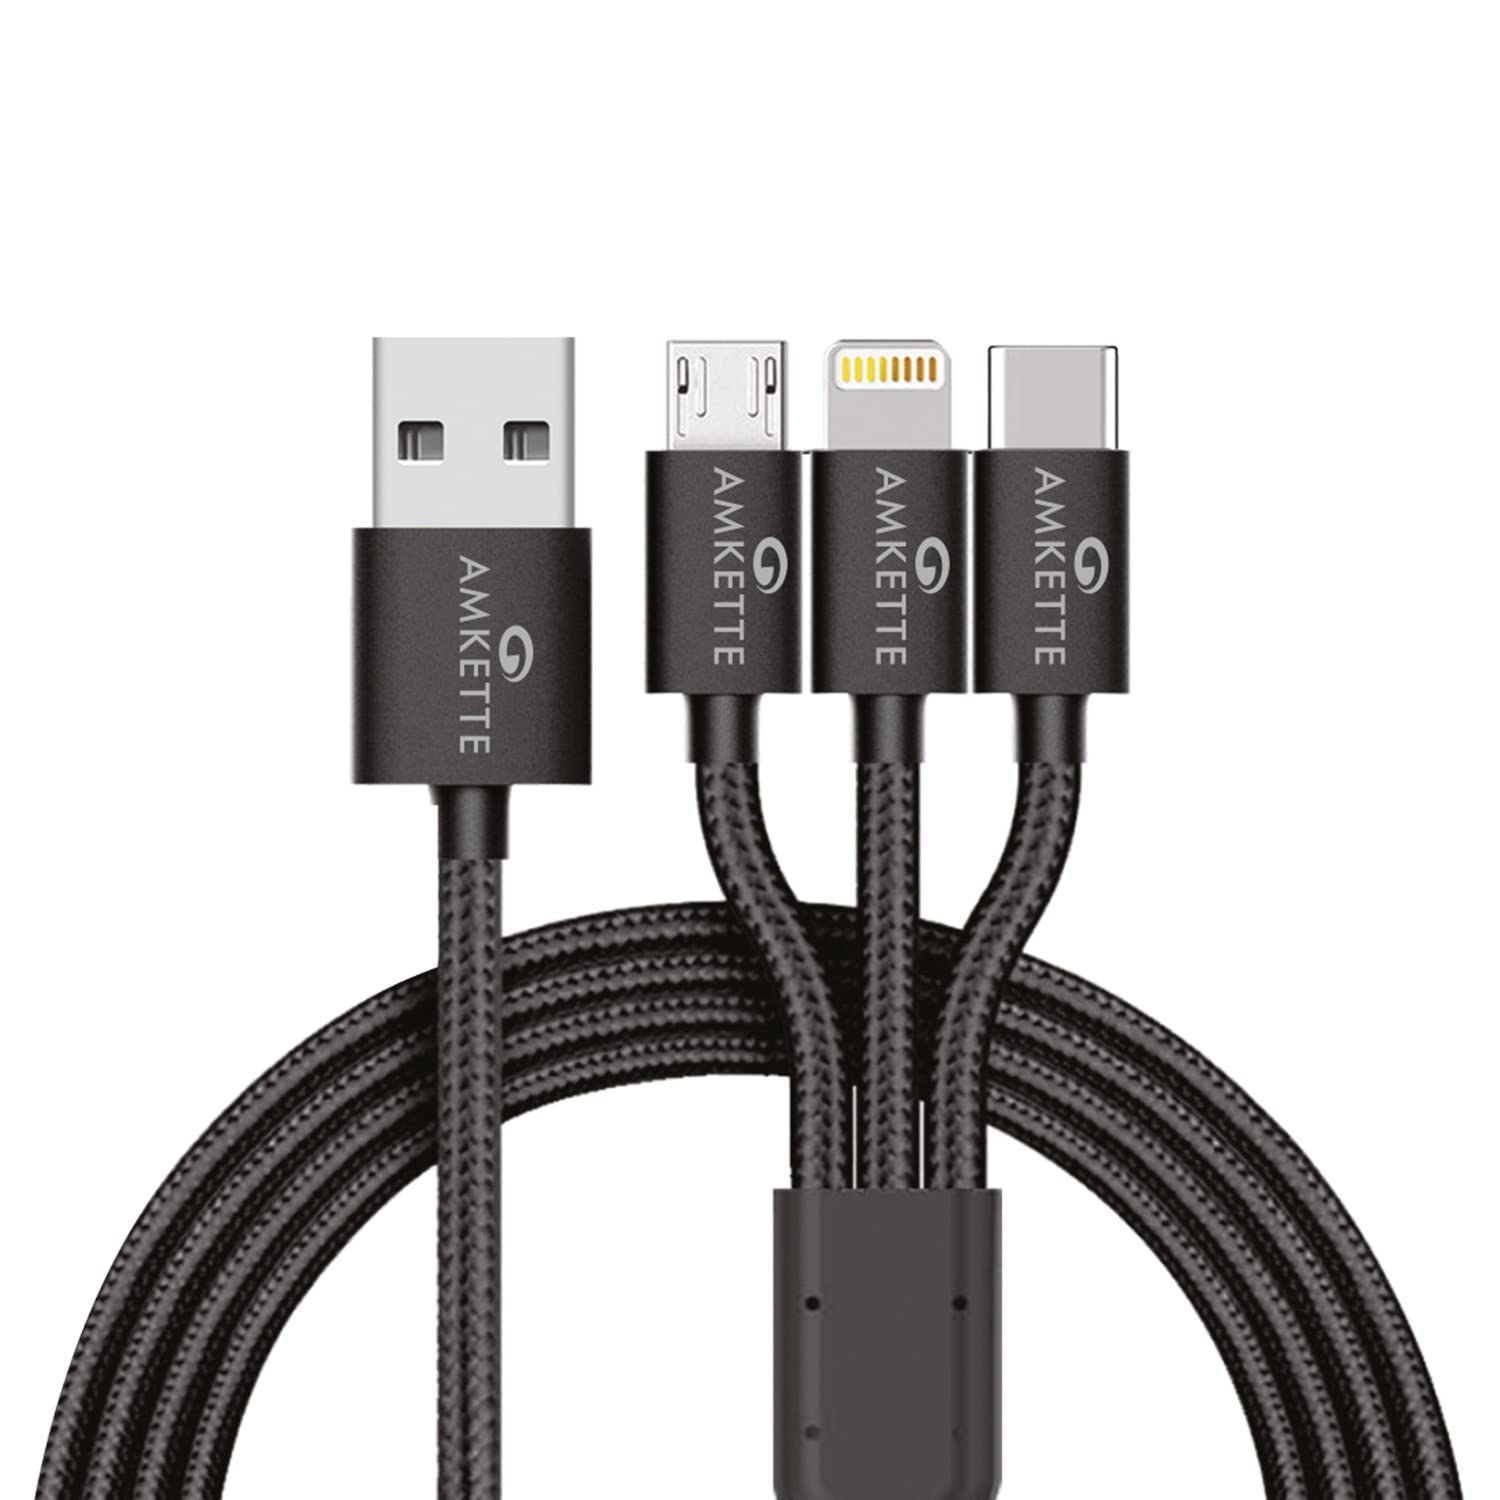 Amkette 3 in 1 Multifunction USB Cable. Micro USB to Type-C to iPhone cable, Silk Braided,Durable and Versatile, For all Android and iPhone Devices, 1 m cable (Grey)